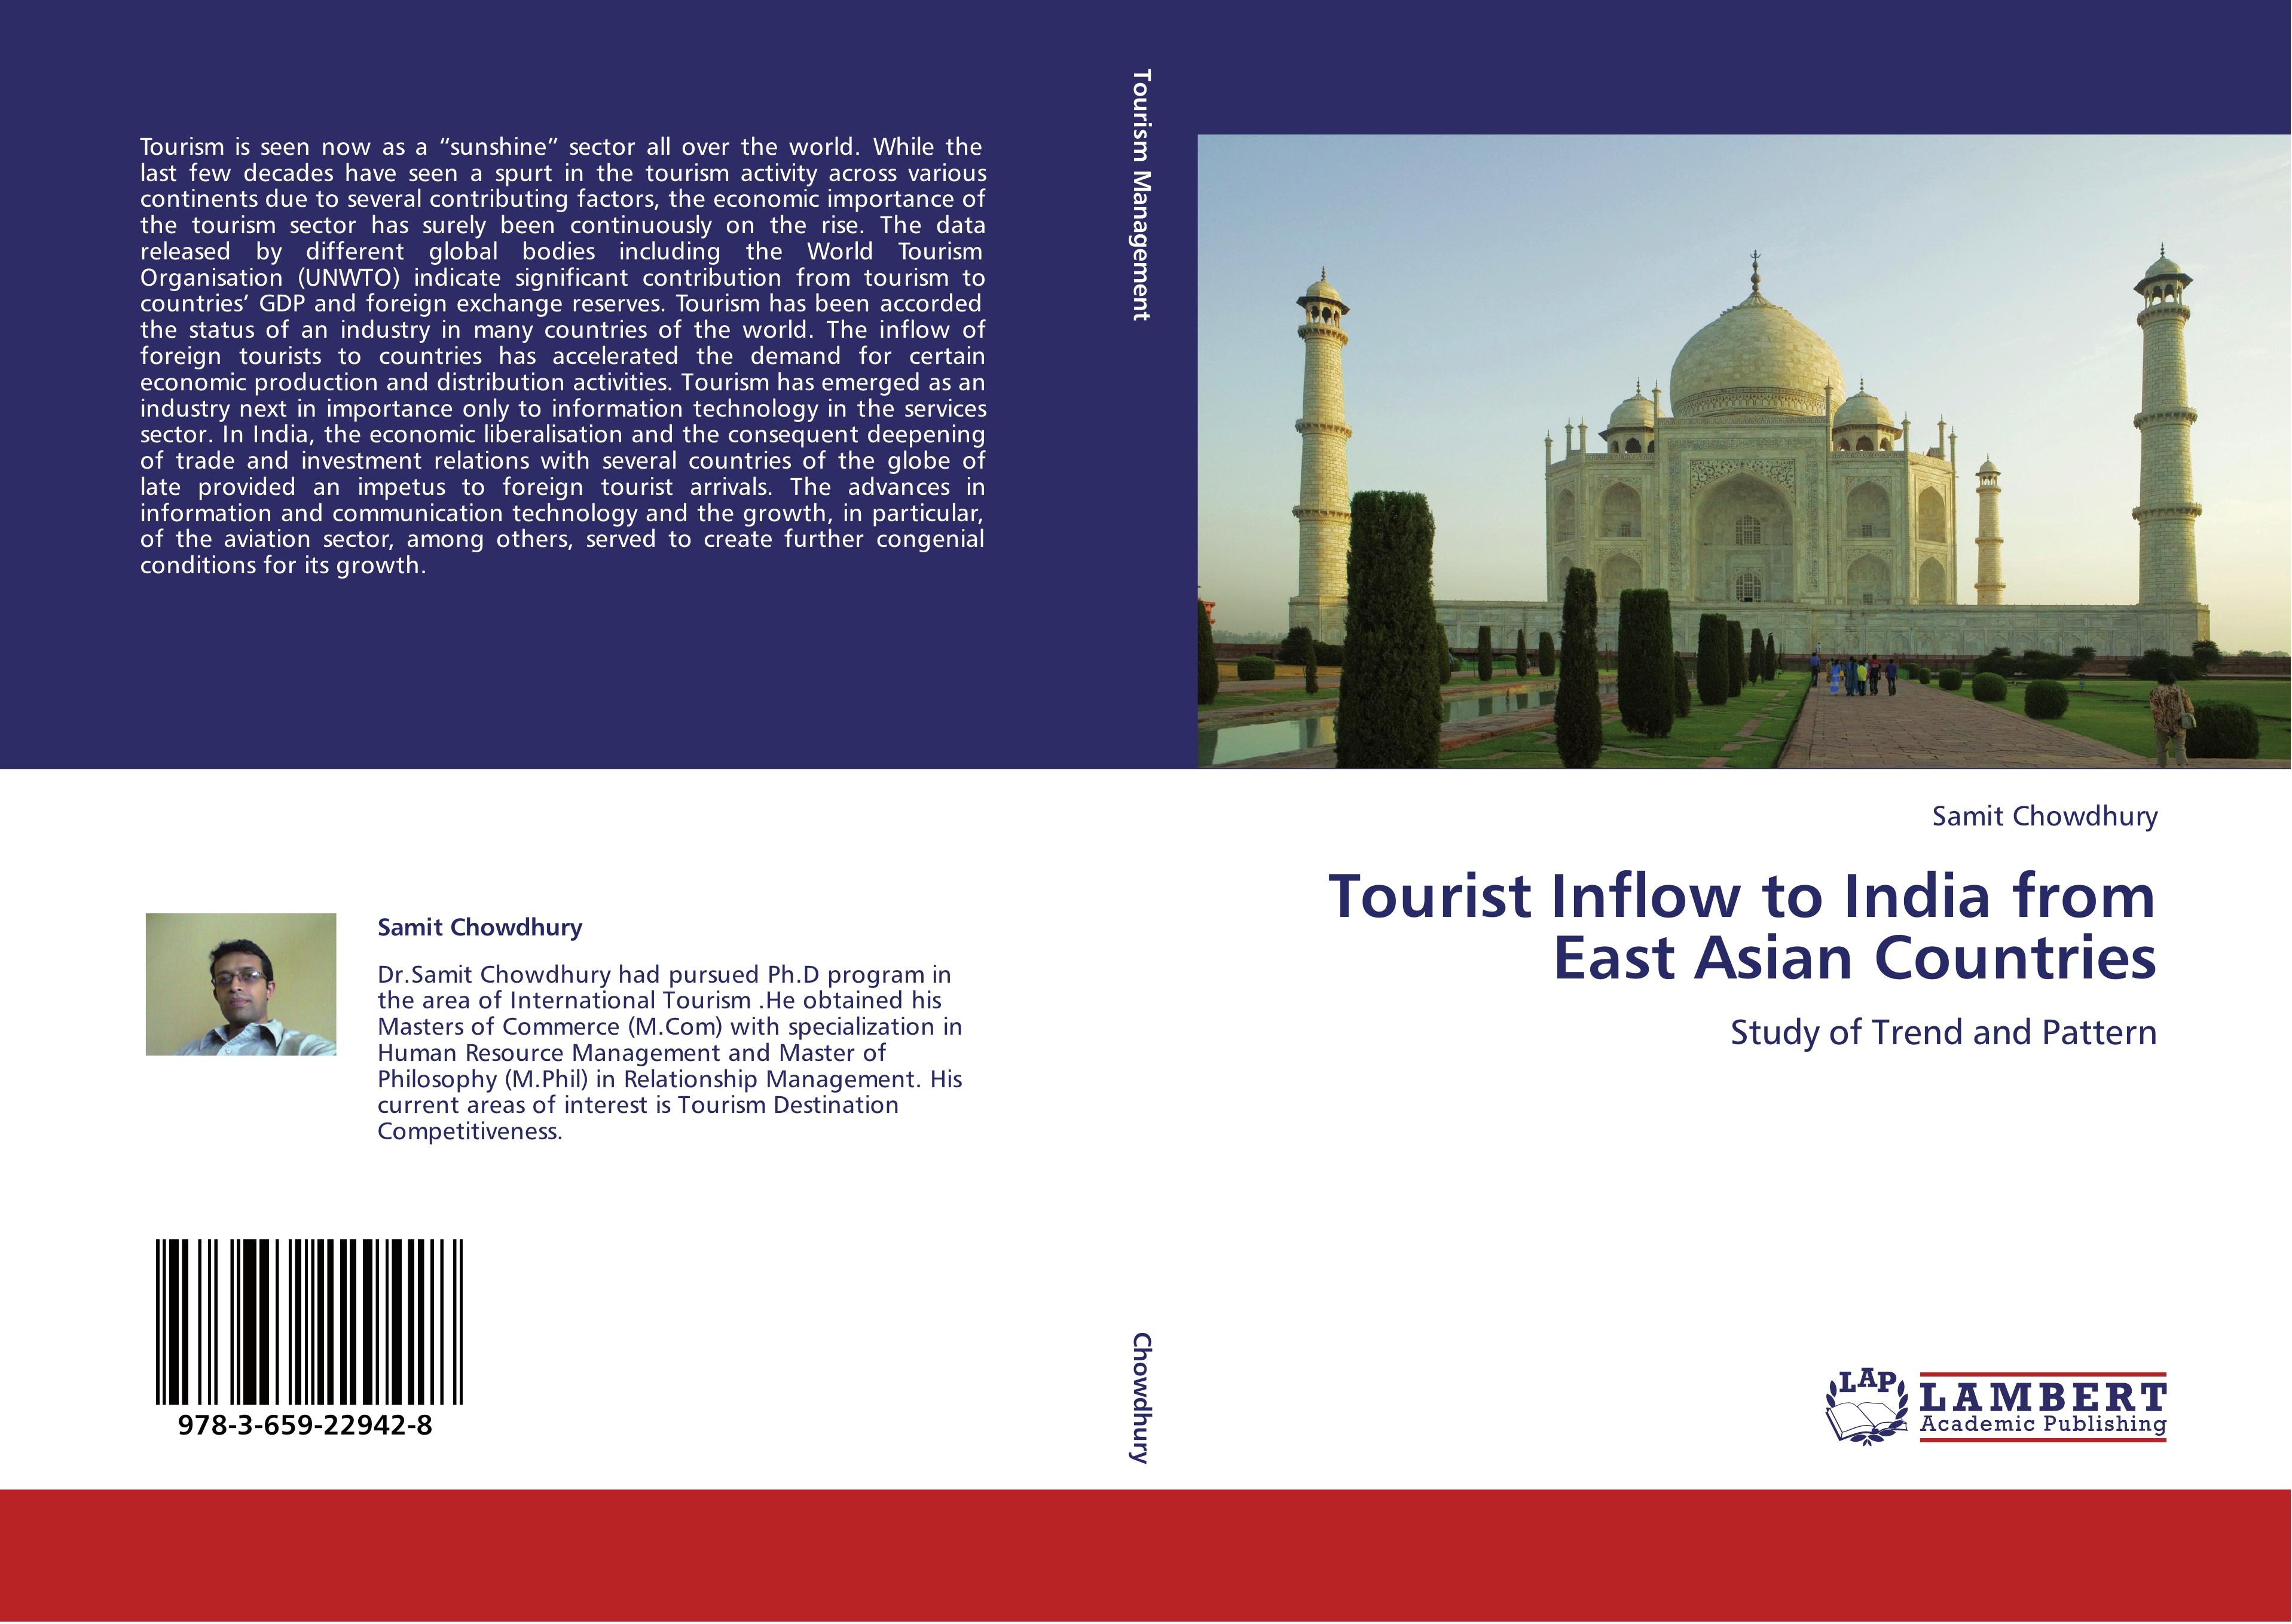 Tourist Inflow to India from East Asian Countries - Samit Chowdhury